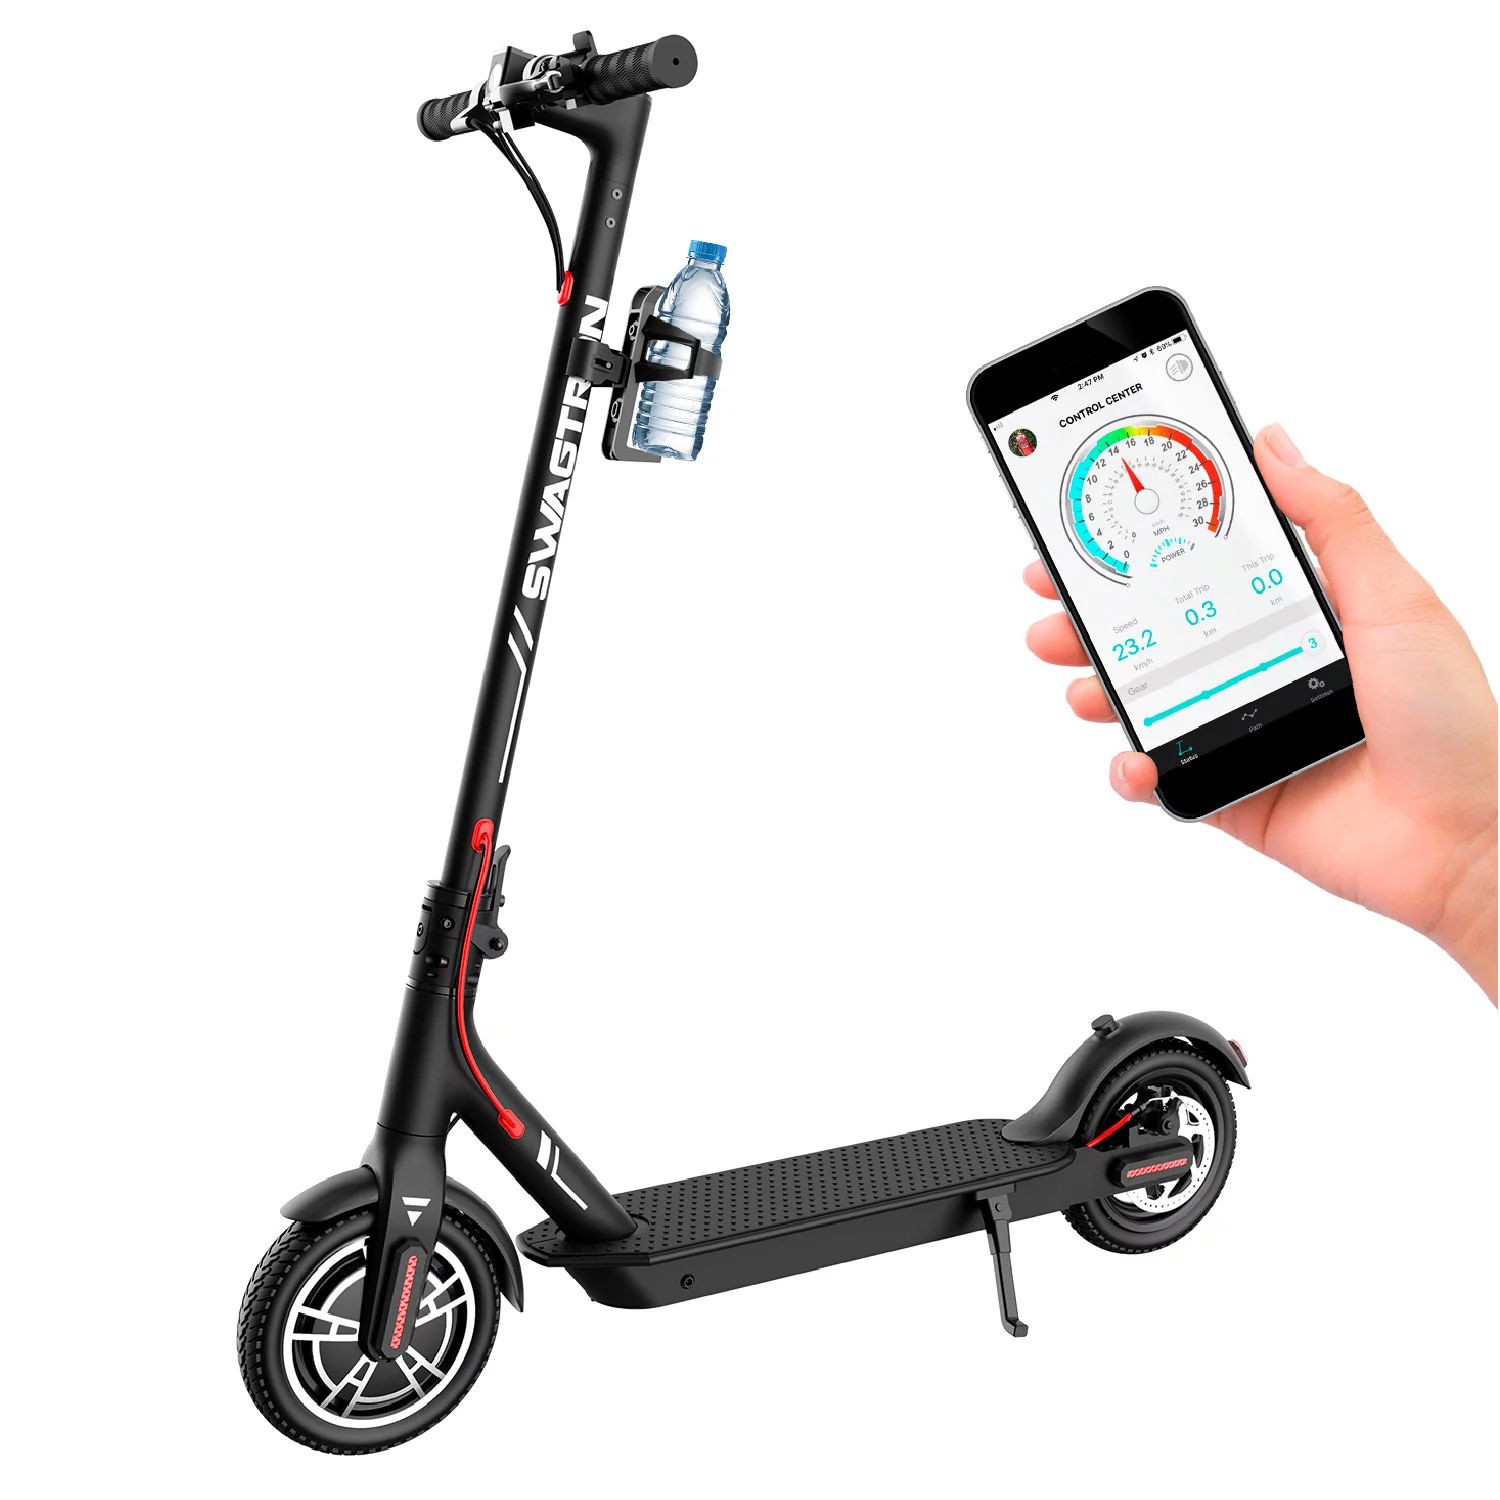 Swagtron Swagger 5 Boost Commuter Electric Scooter, 320 Lb Weight limit, 8.5 Inch No-flat Tires, ... | Walmart (US)